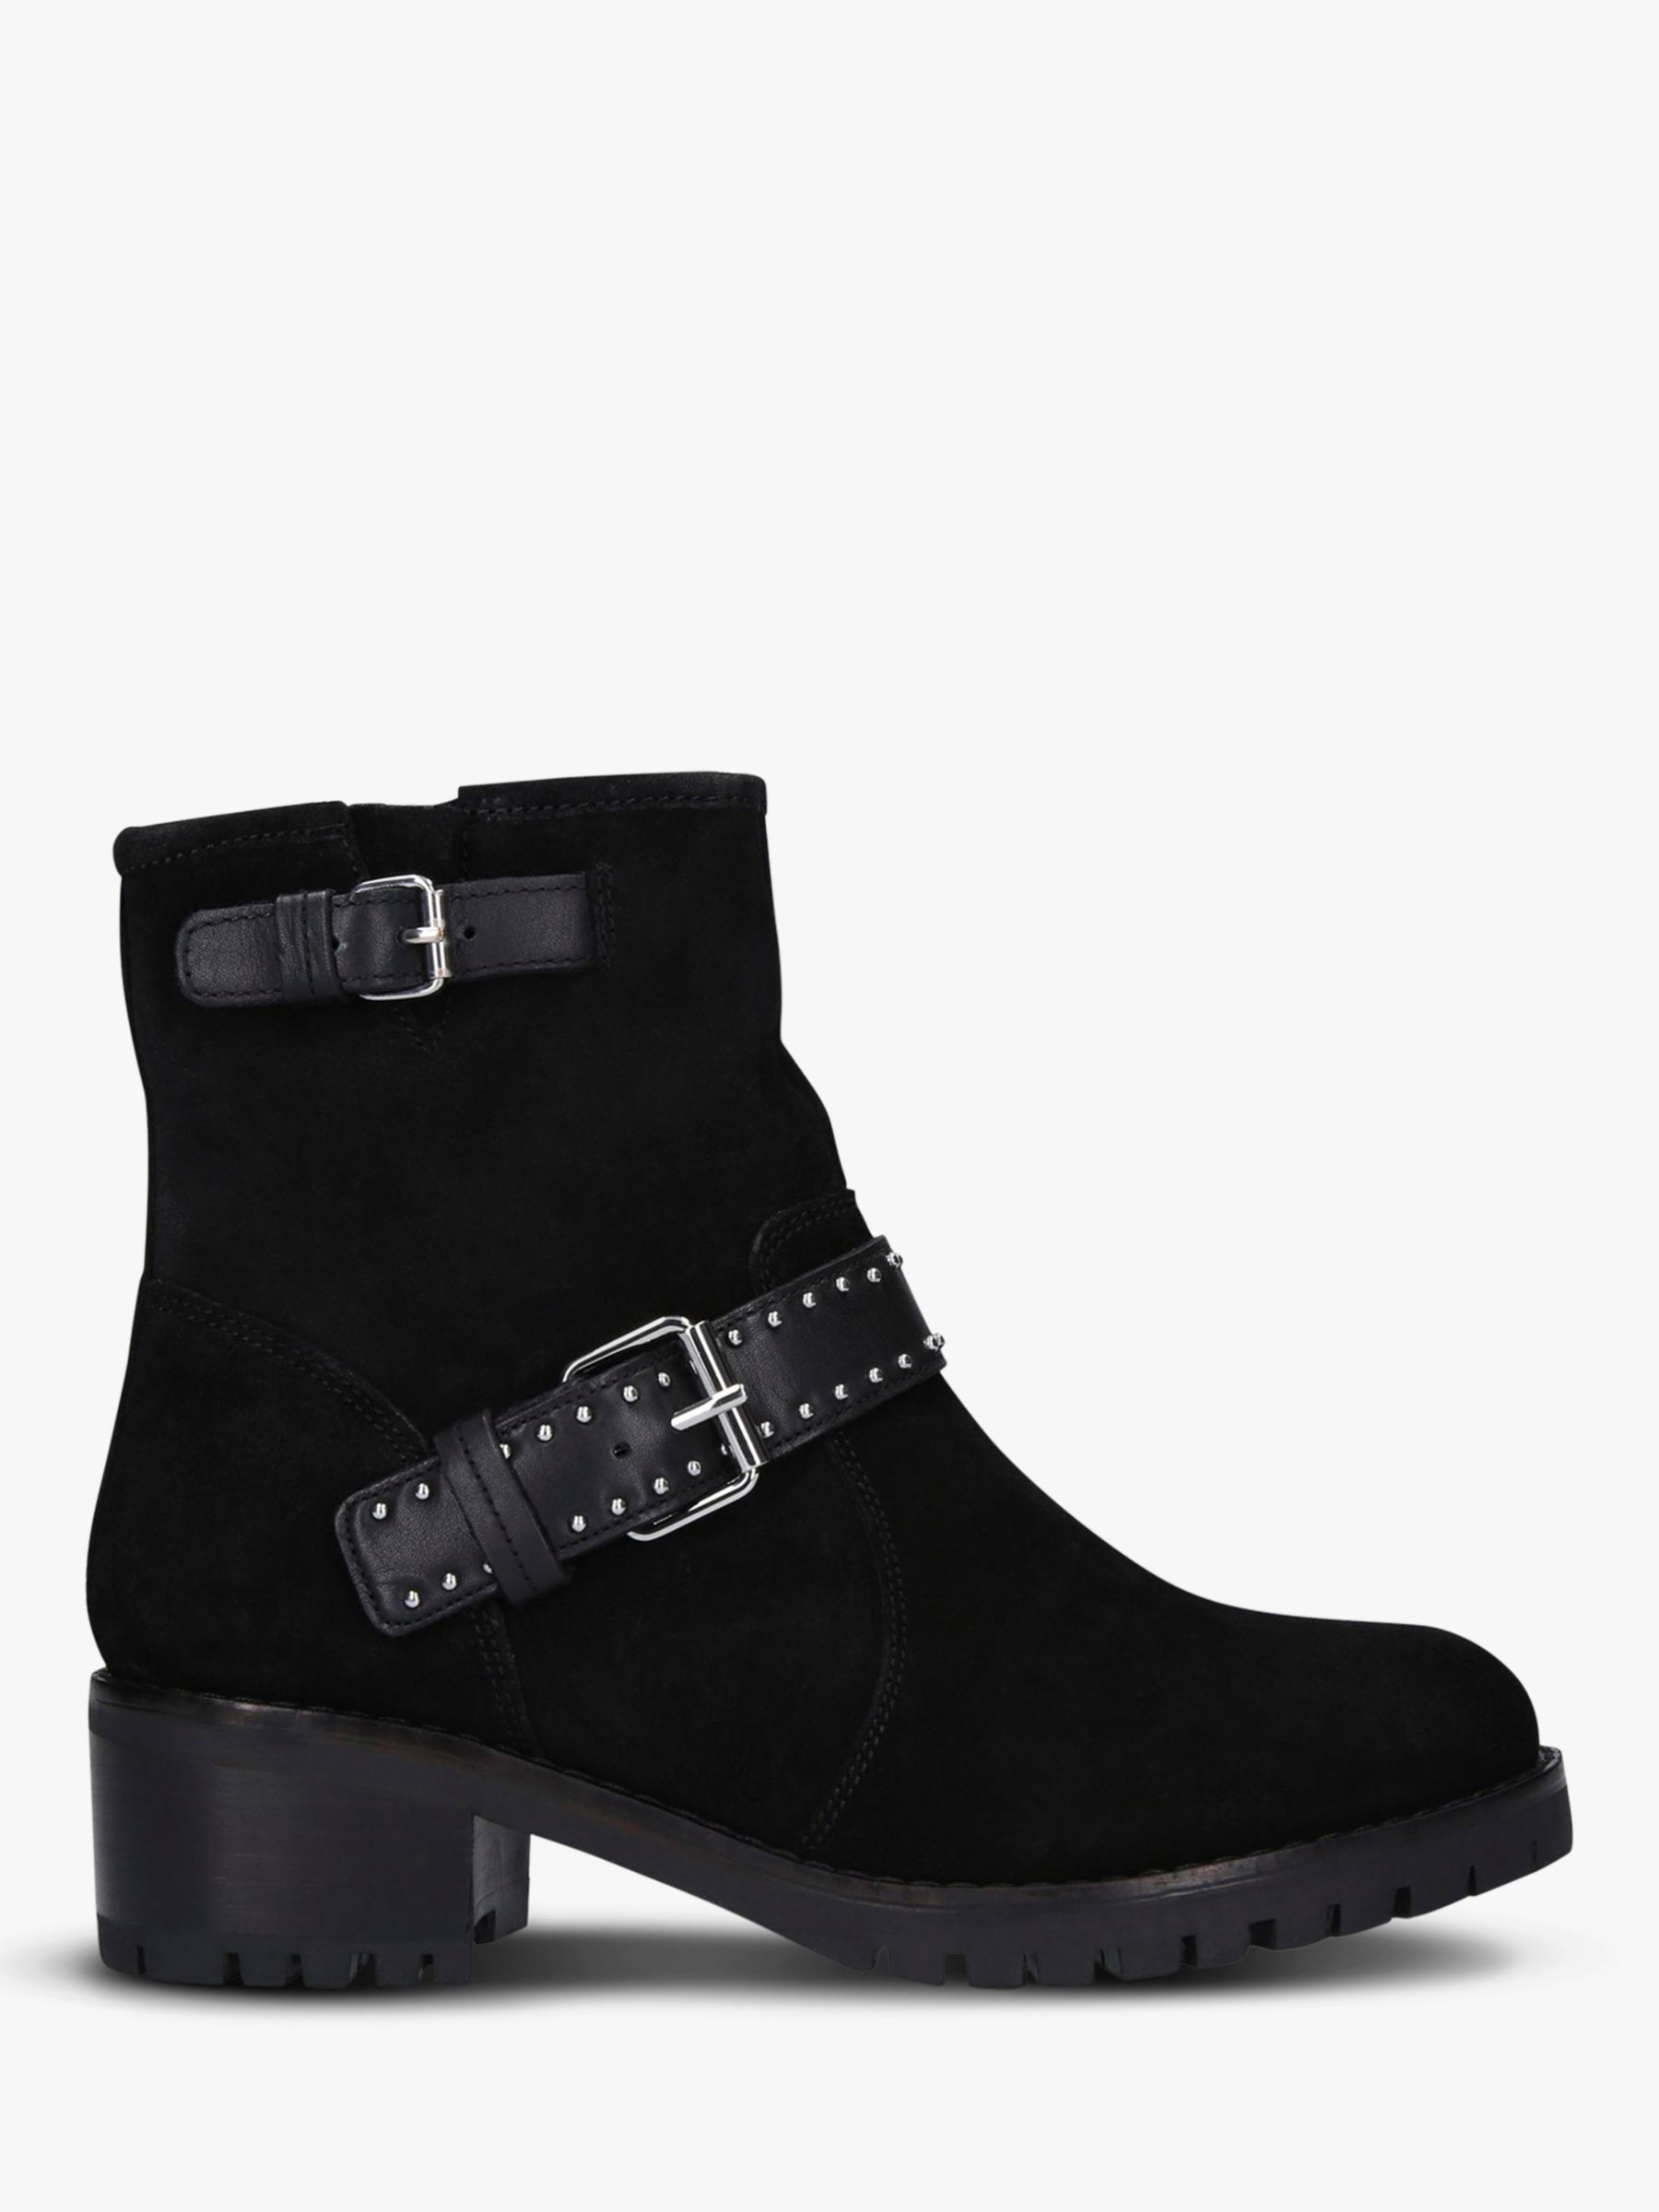 Carvela Comfort Reality Suede Studded Block Heel Ankle Boots, Black at ...